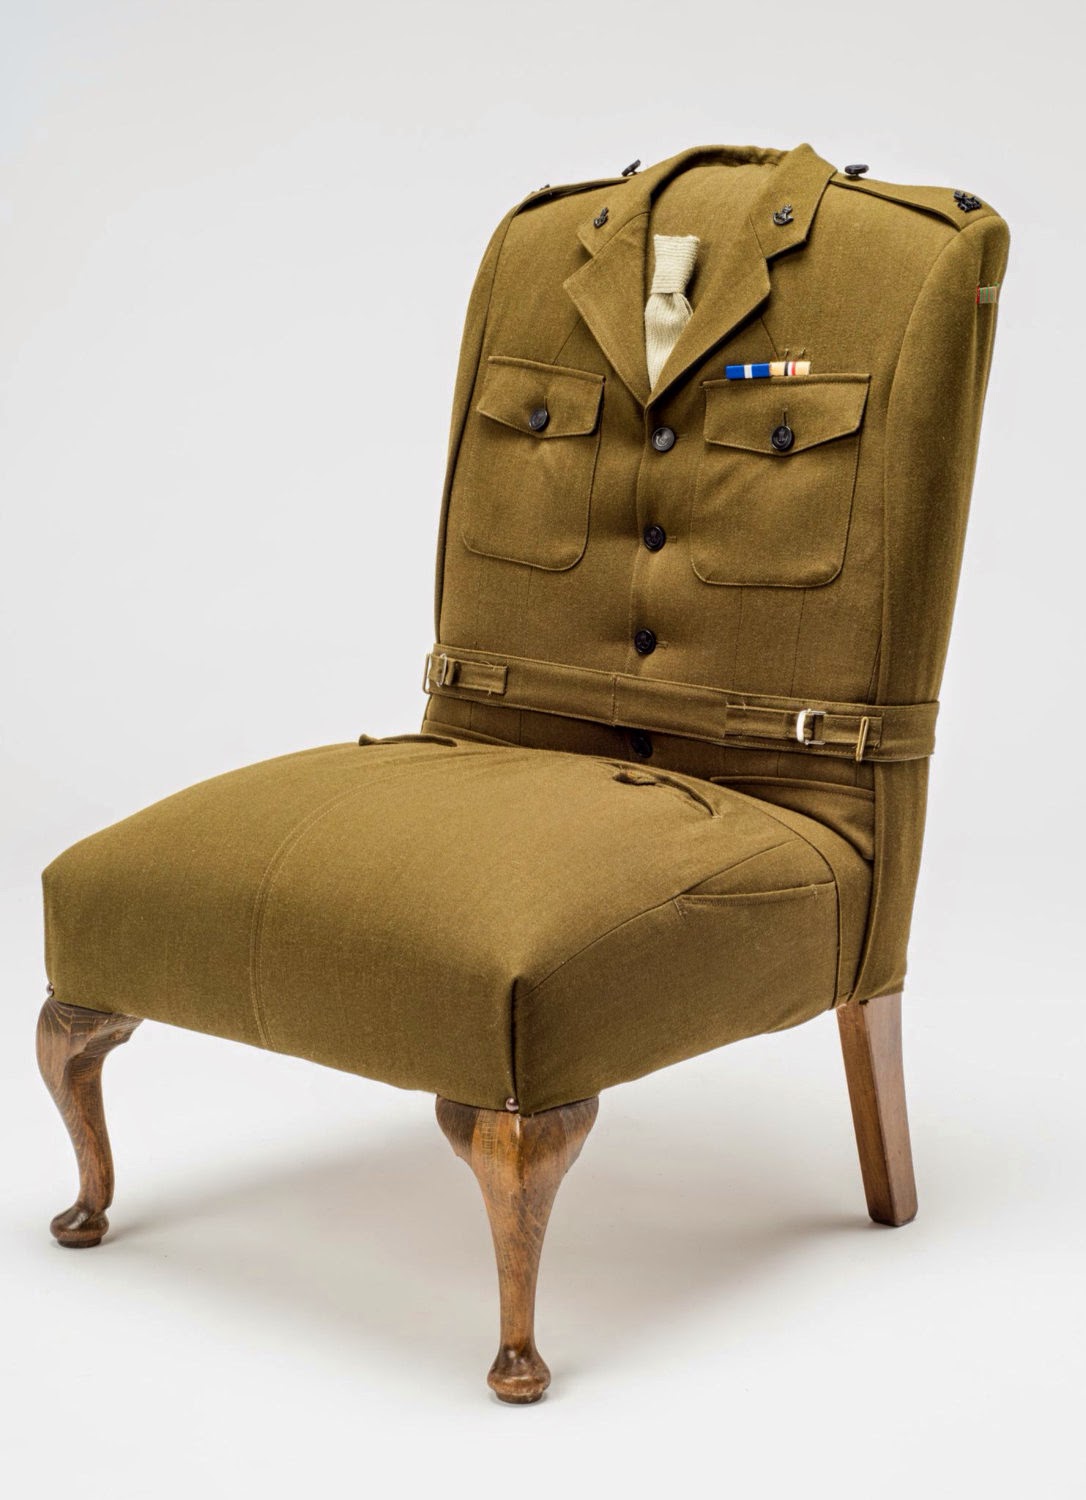 10-British-Army-uniform-RescuedRetroVintage-Upcycled-Vintage-Armchairs-&-Chairs-www-designstack-co